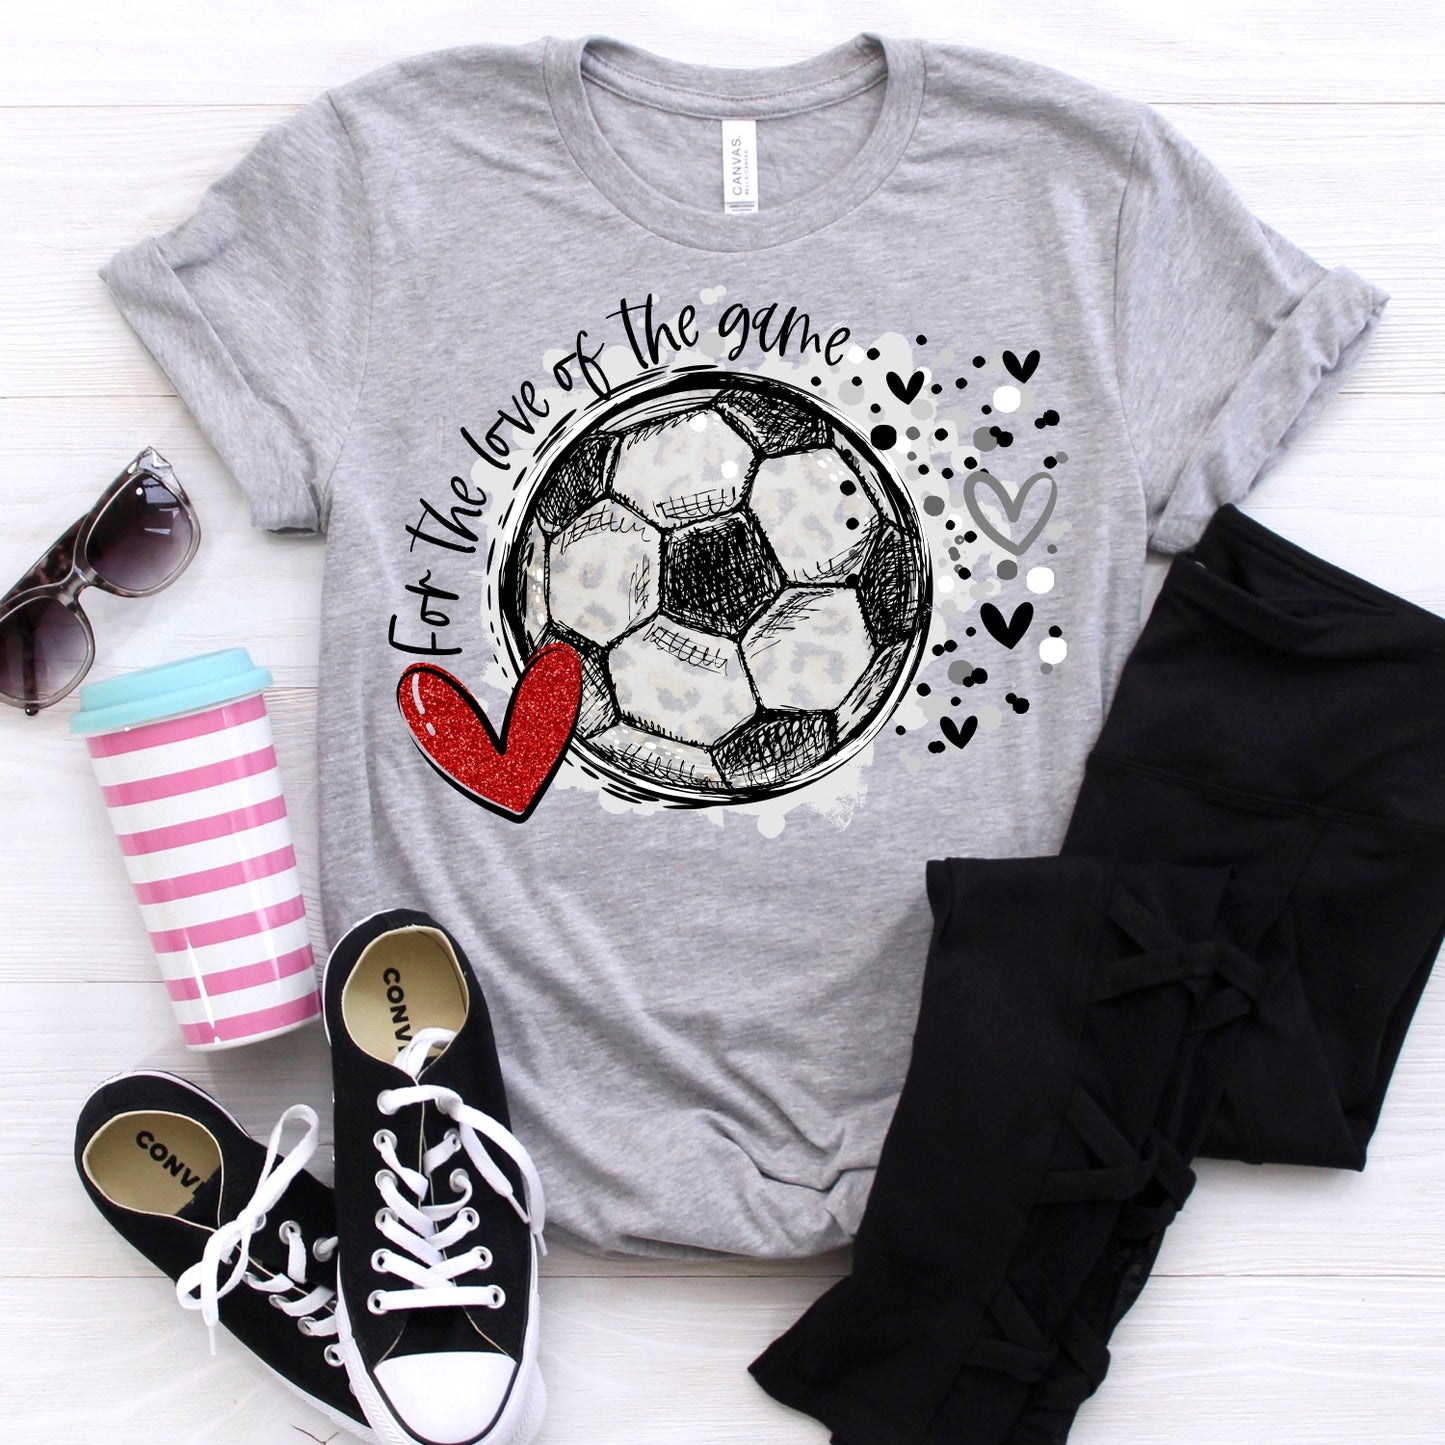 For the love of the game - soccer